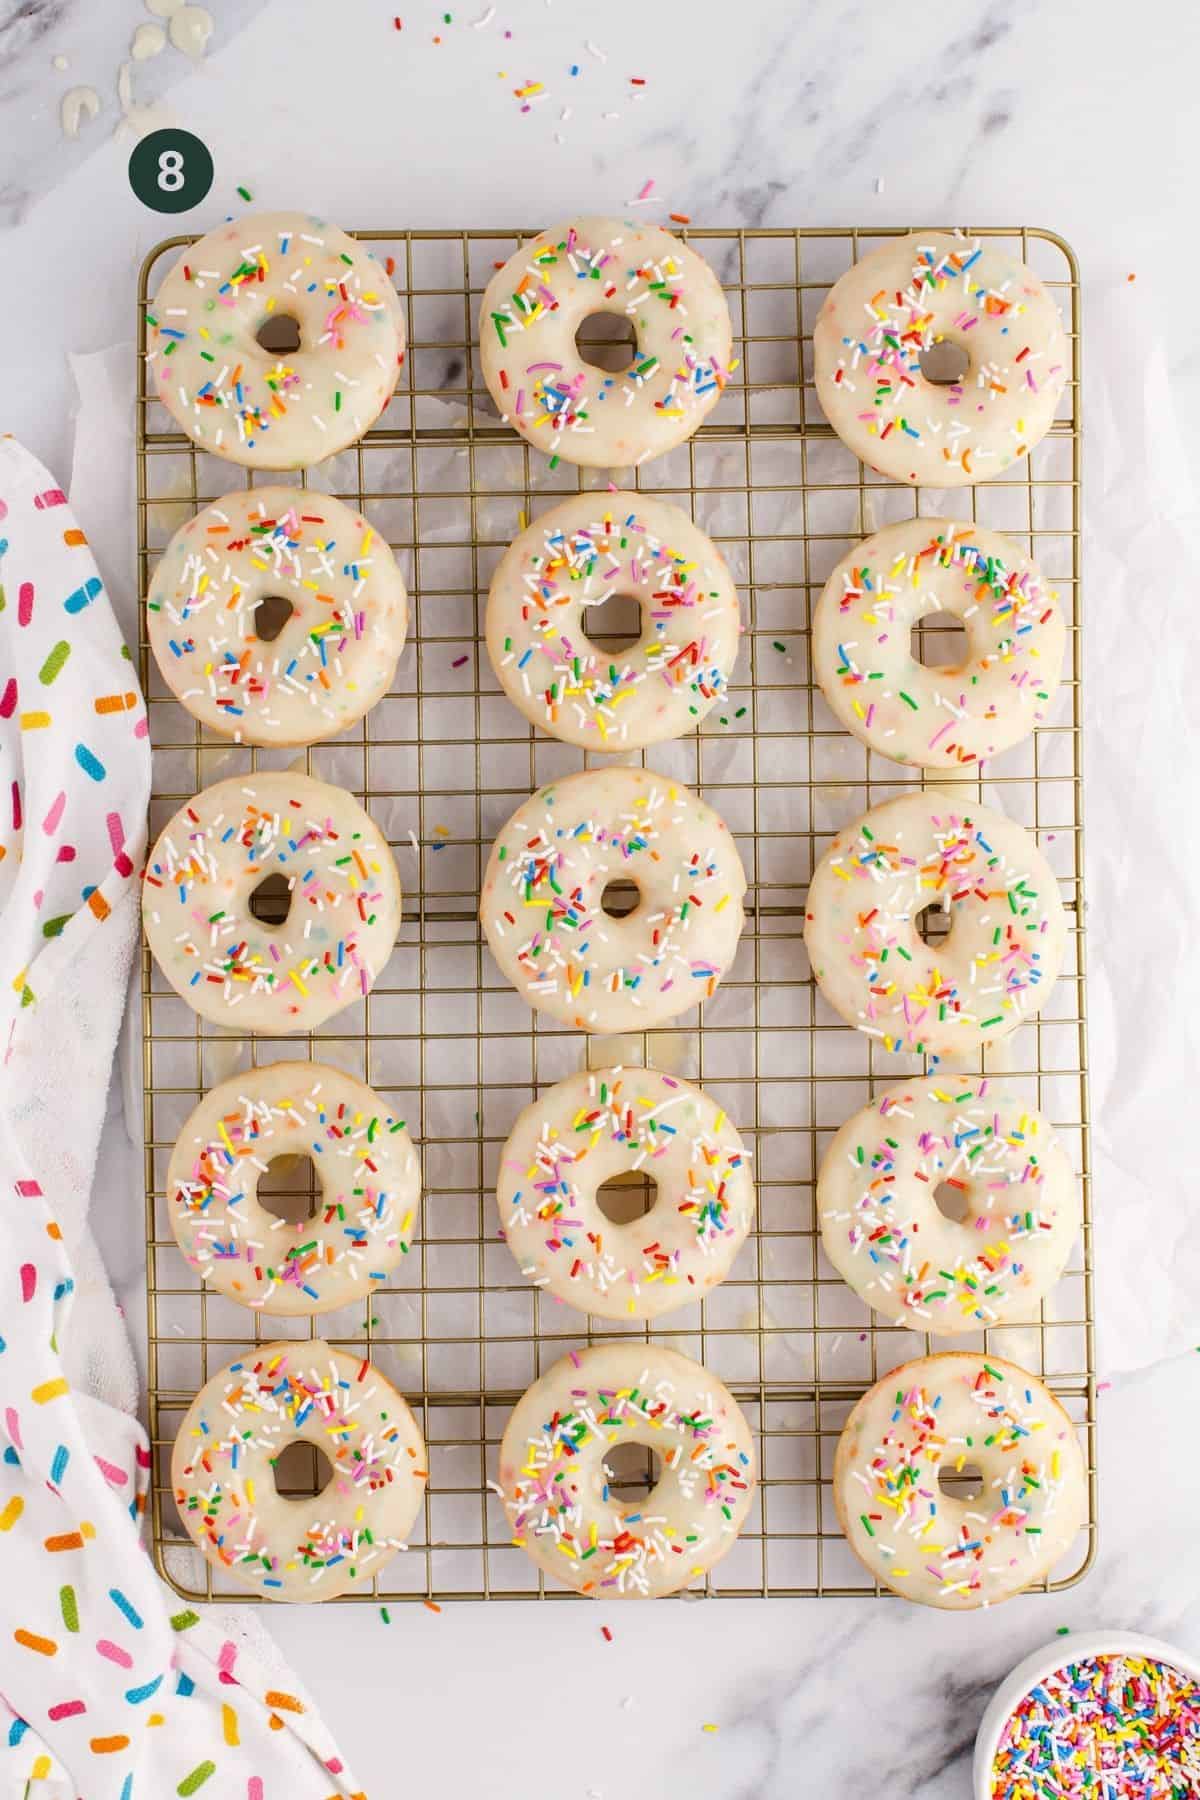 Frosted donuts with sprinkles on top.